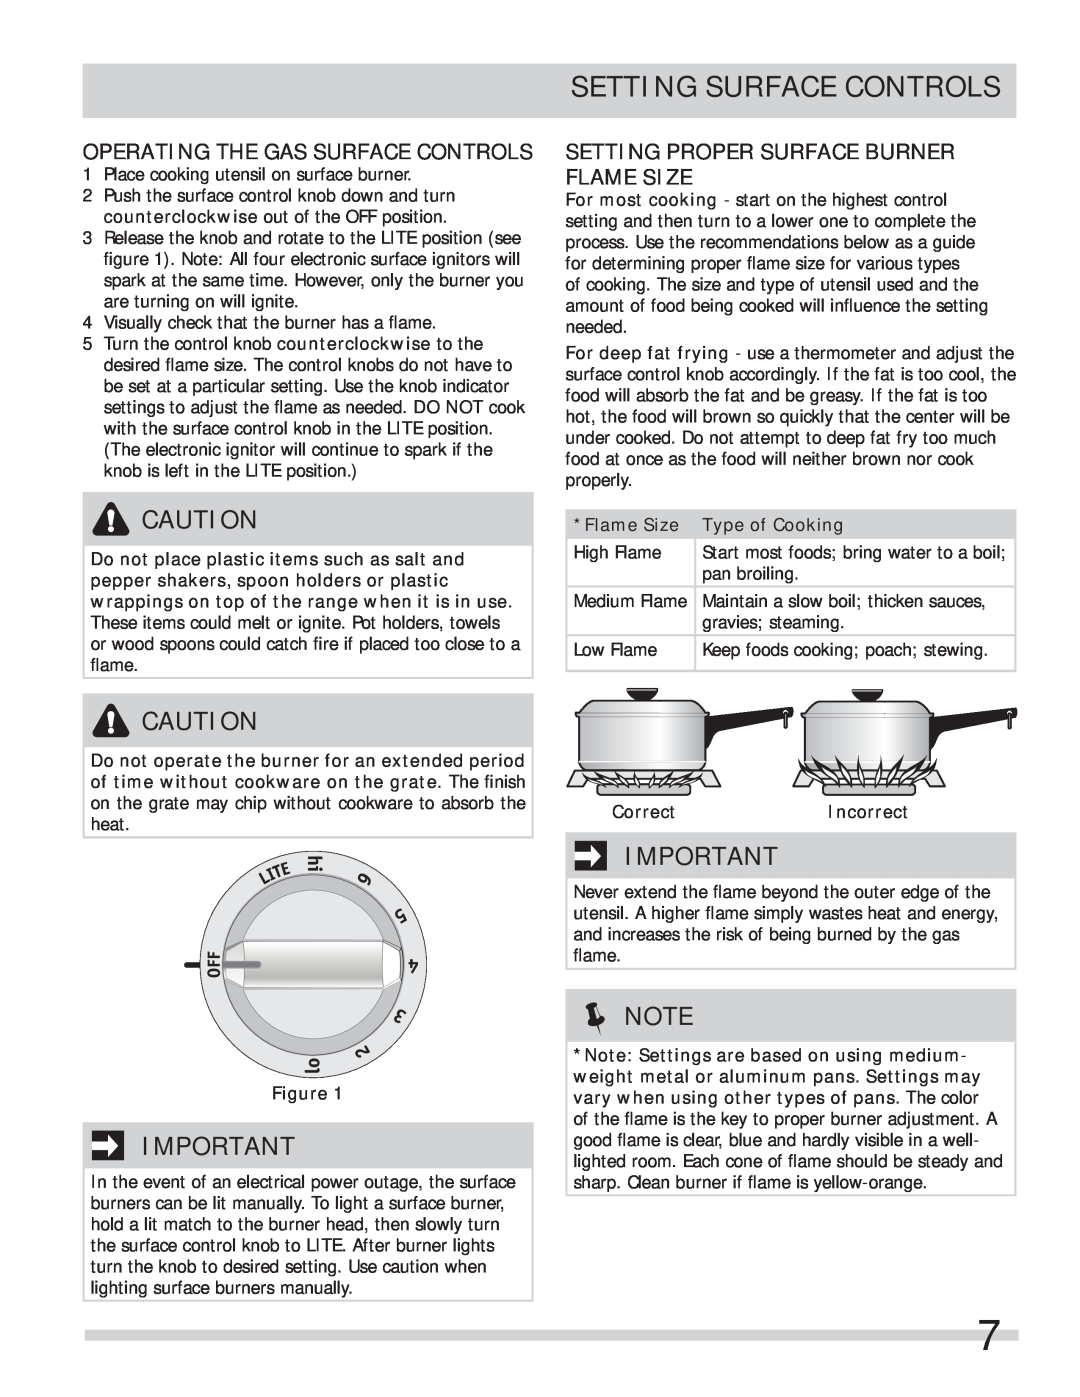 Frigidaire A01704501 important safety instructions Setting Surface Controls, Operating The Gas Surface Controls, Note 